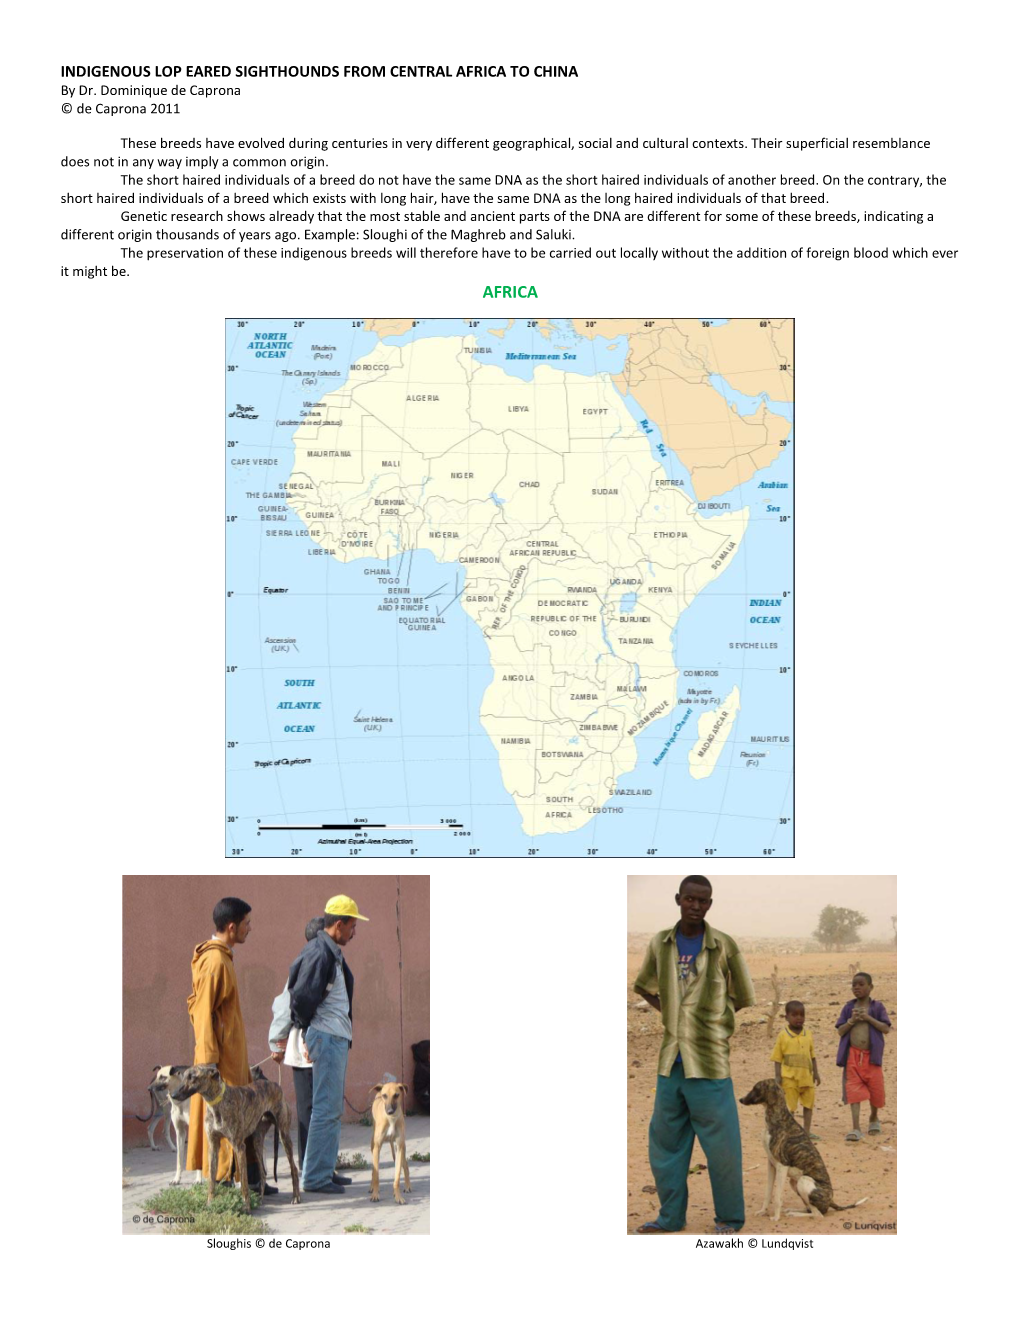 INDIGENOUS LOP EARED SIGHTHOUNDS from CENTRAL AFRICA to CHINA by Dr